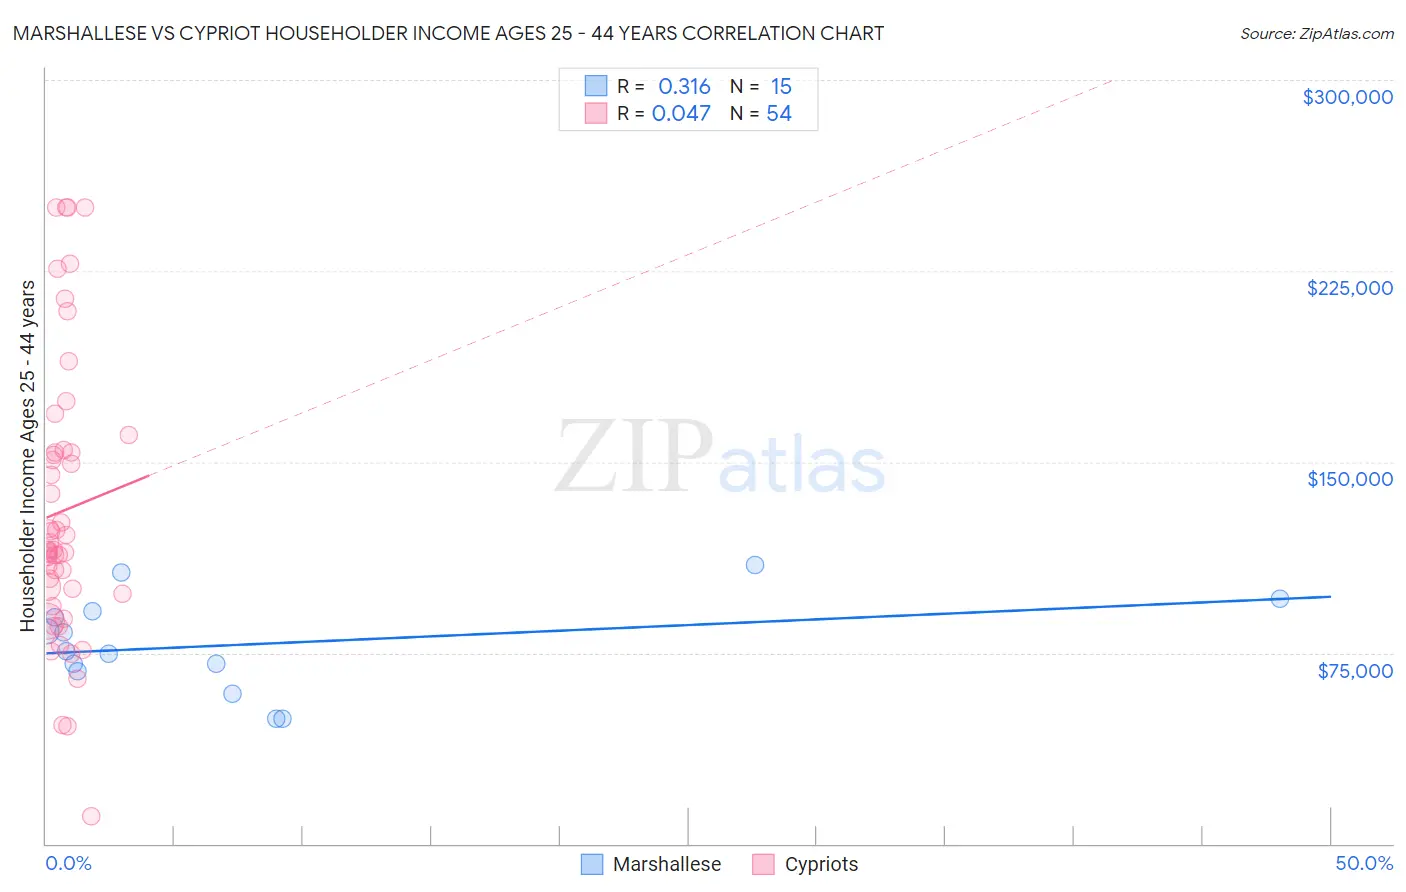 Marshallese vs Cypriot Householder Income Ages 25 - 44 years